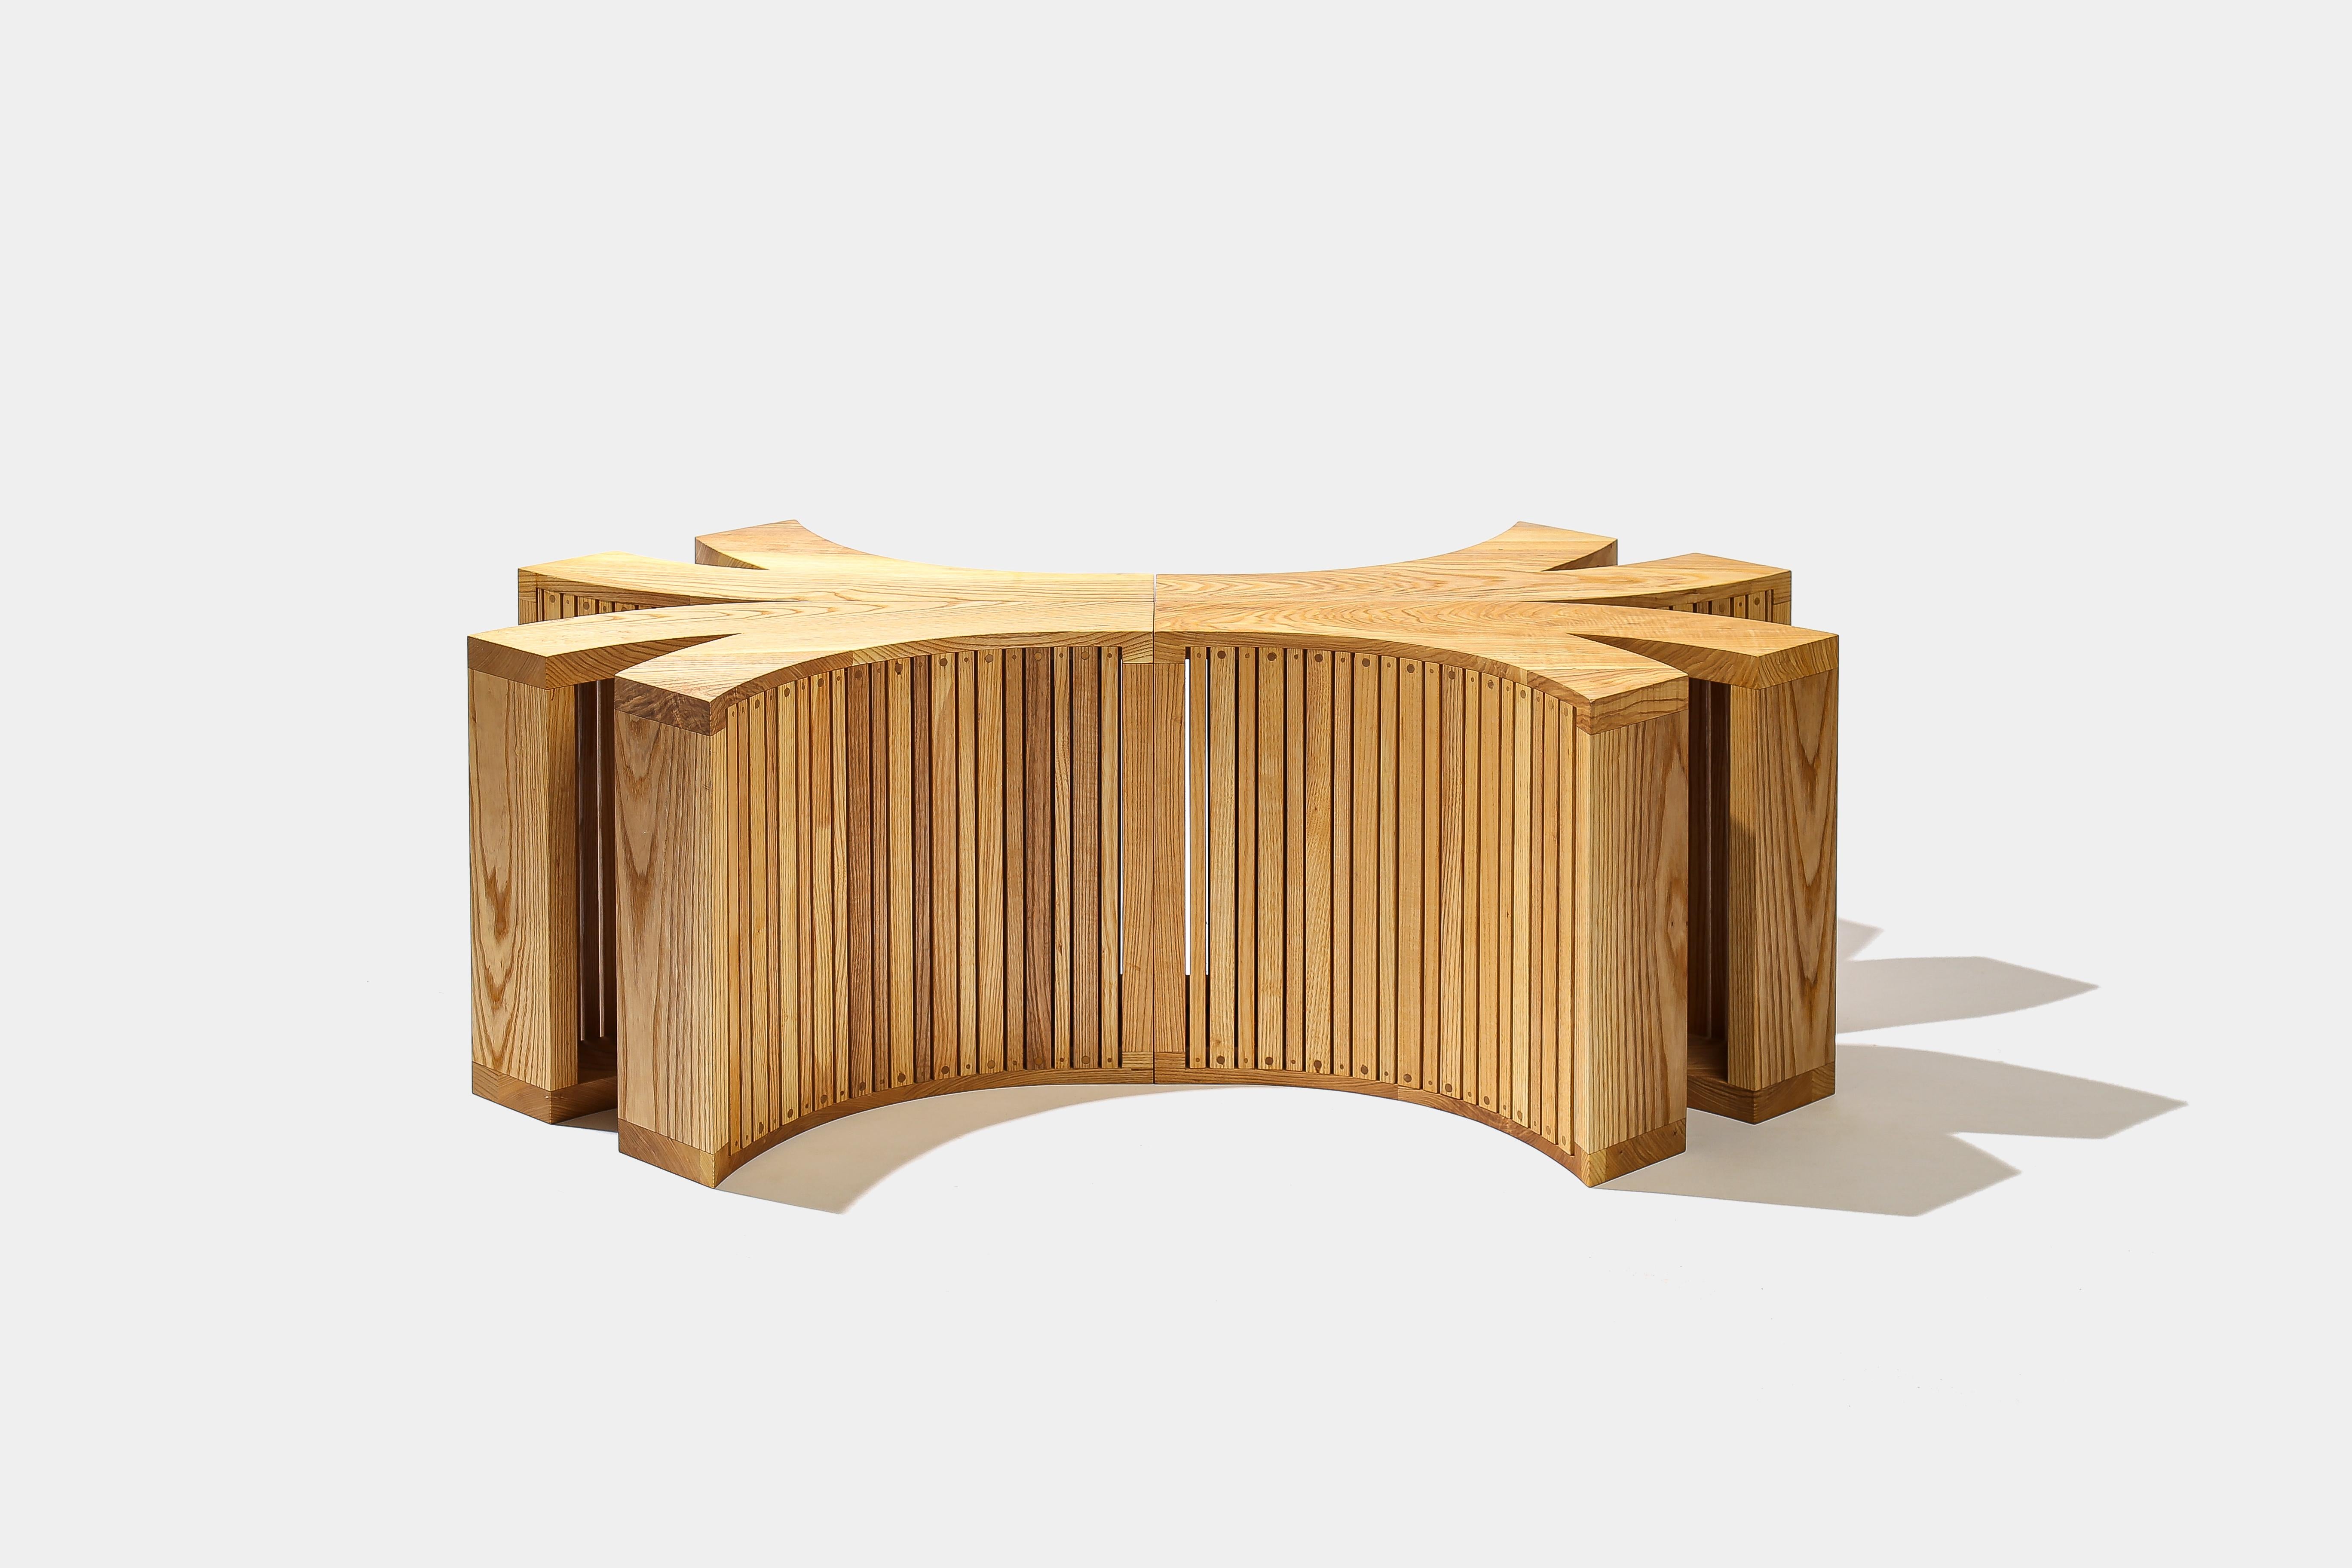 Slatted Ash Stools were designed in collaboration with Alex Sowinski (of BadBadNotGood) in 2019. This set was conceived to accompany a live performance of BadBadNotGood at Dylan Moore's studio in Toronto. They were lit up from the inside